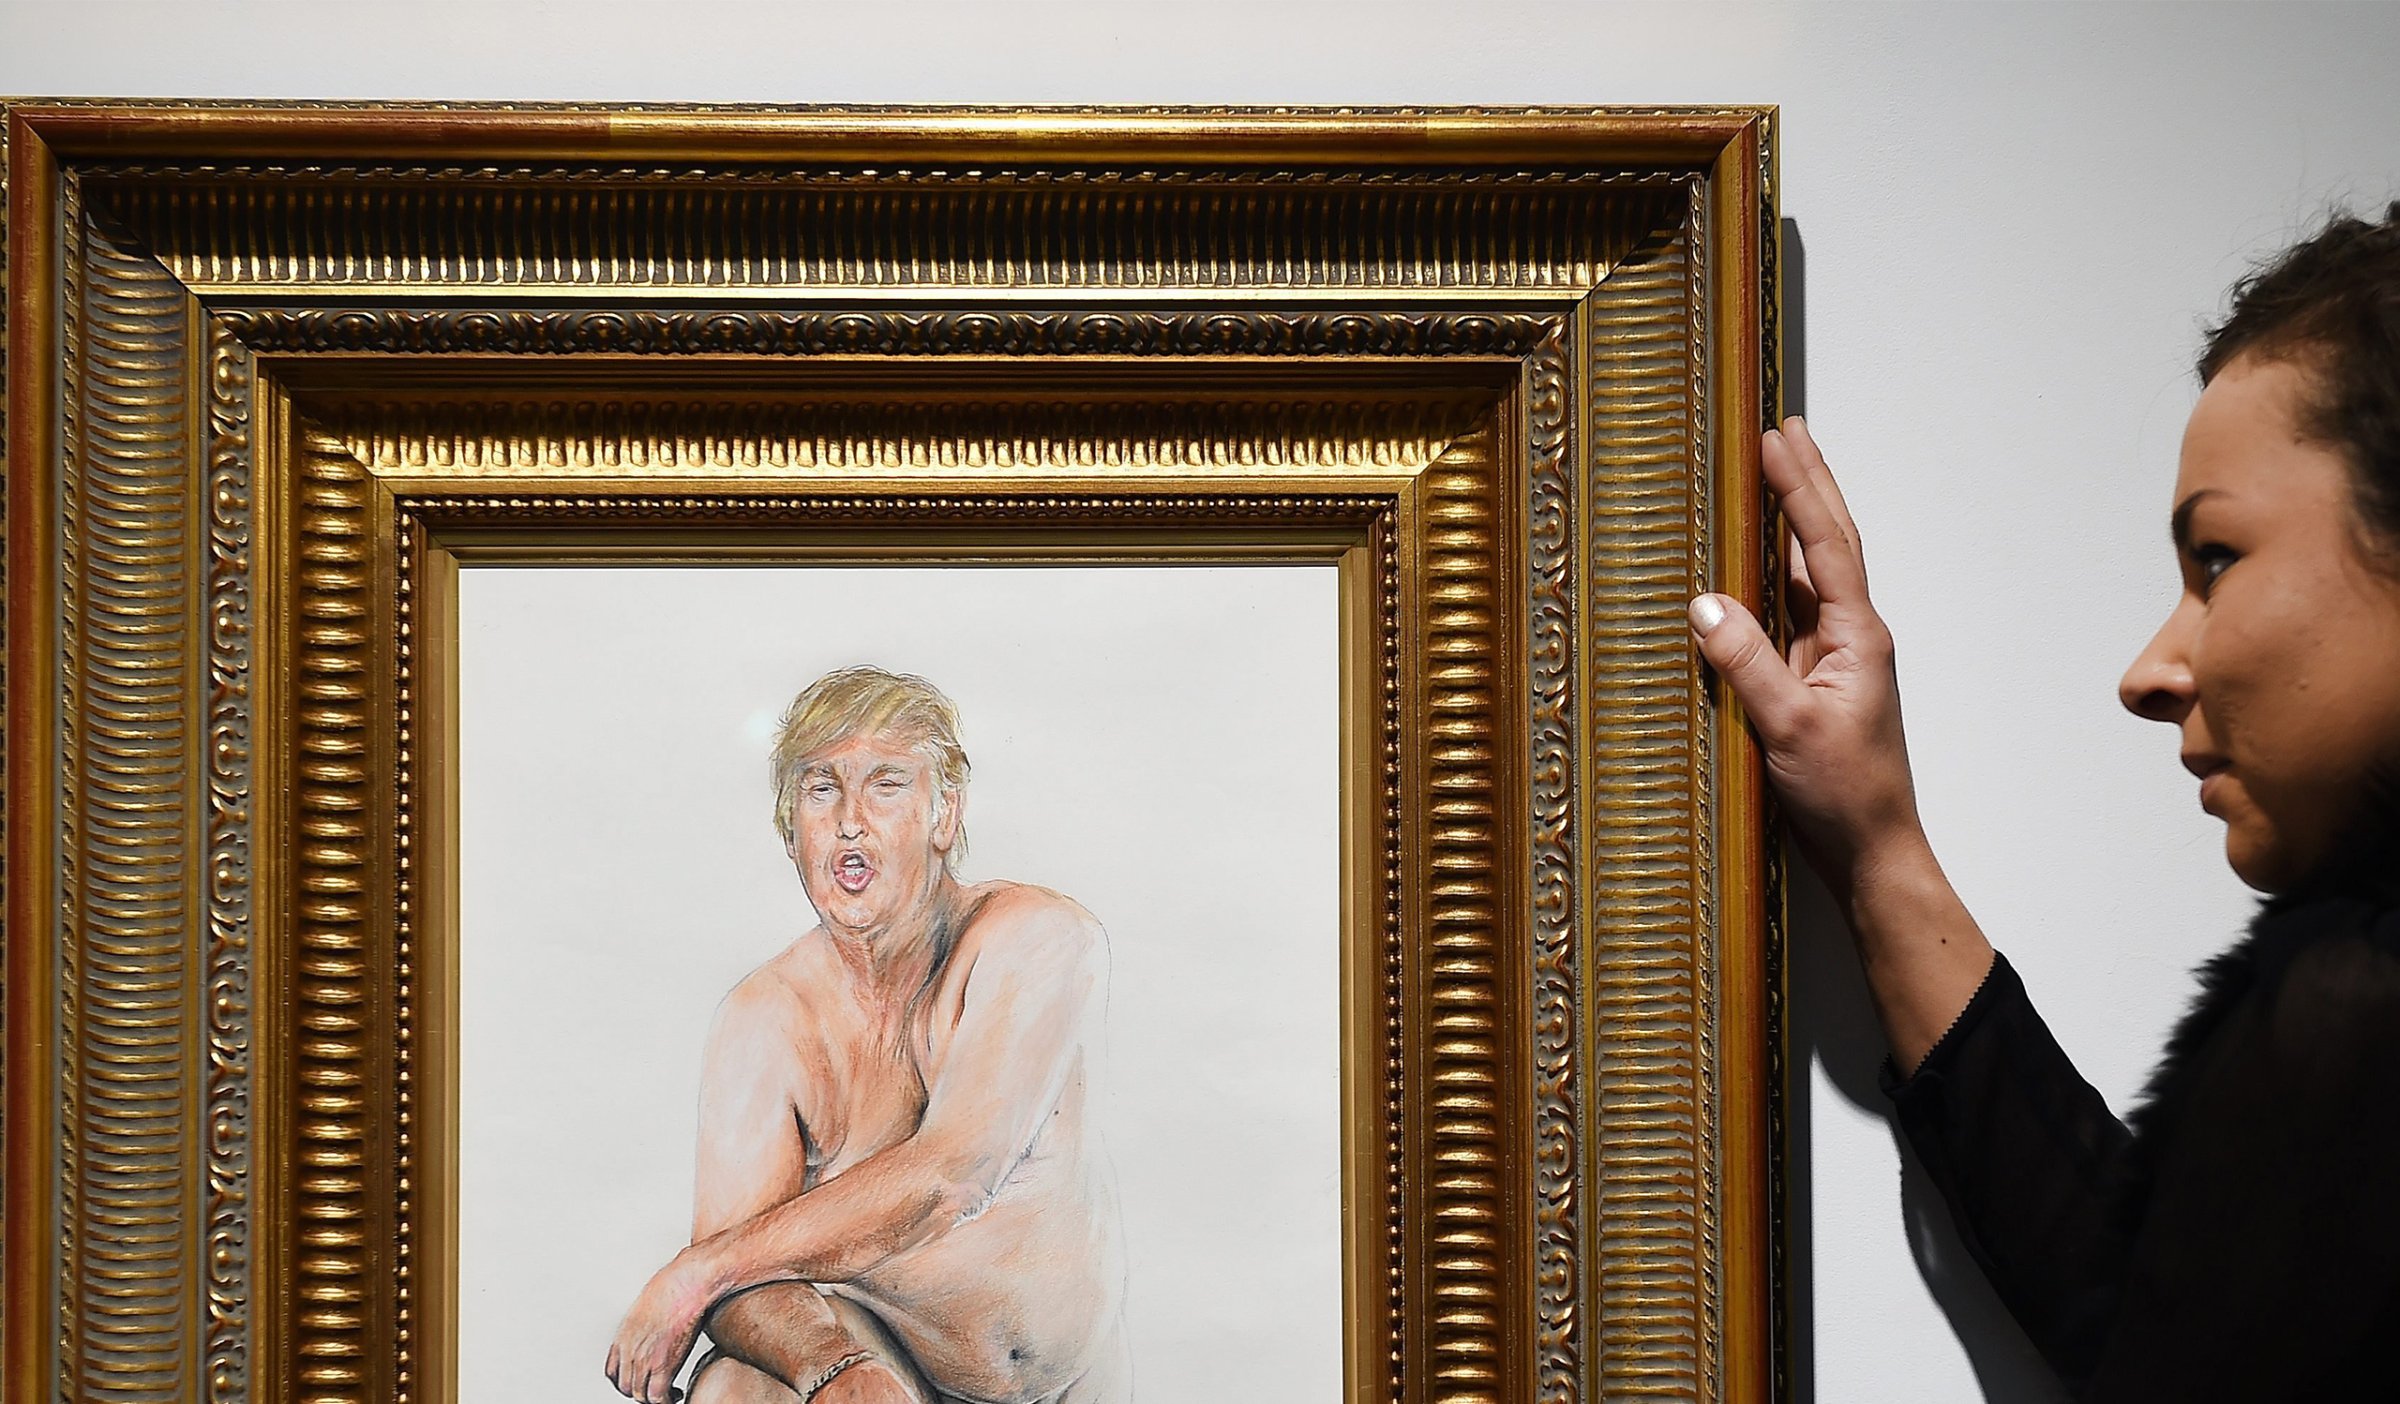 A woman adjusts a painting depicting a naked man with the head of Donald Trump by US artist Illma Gore at the Maddox Gallery in London, April 11, 2016.